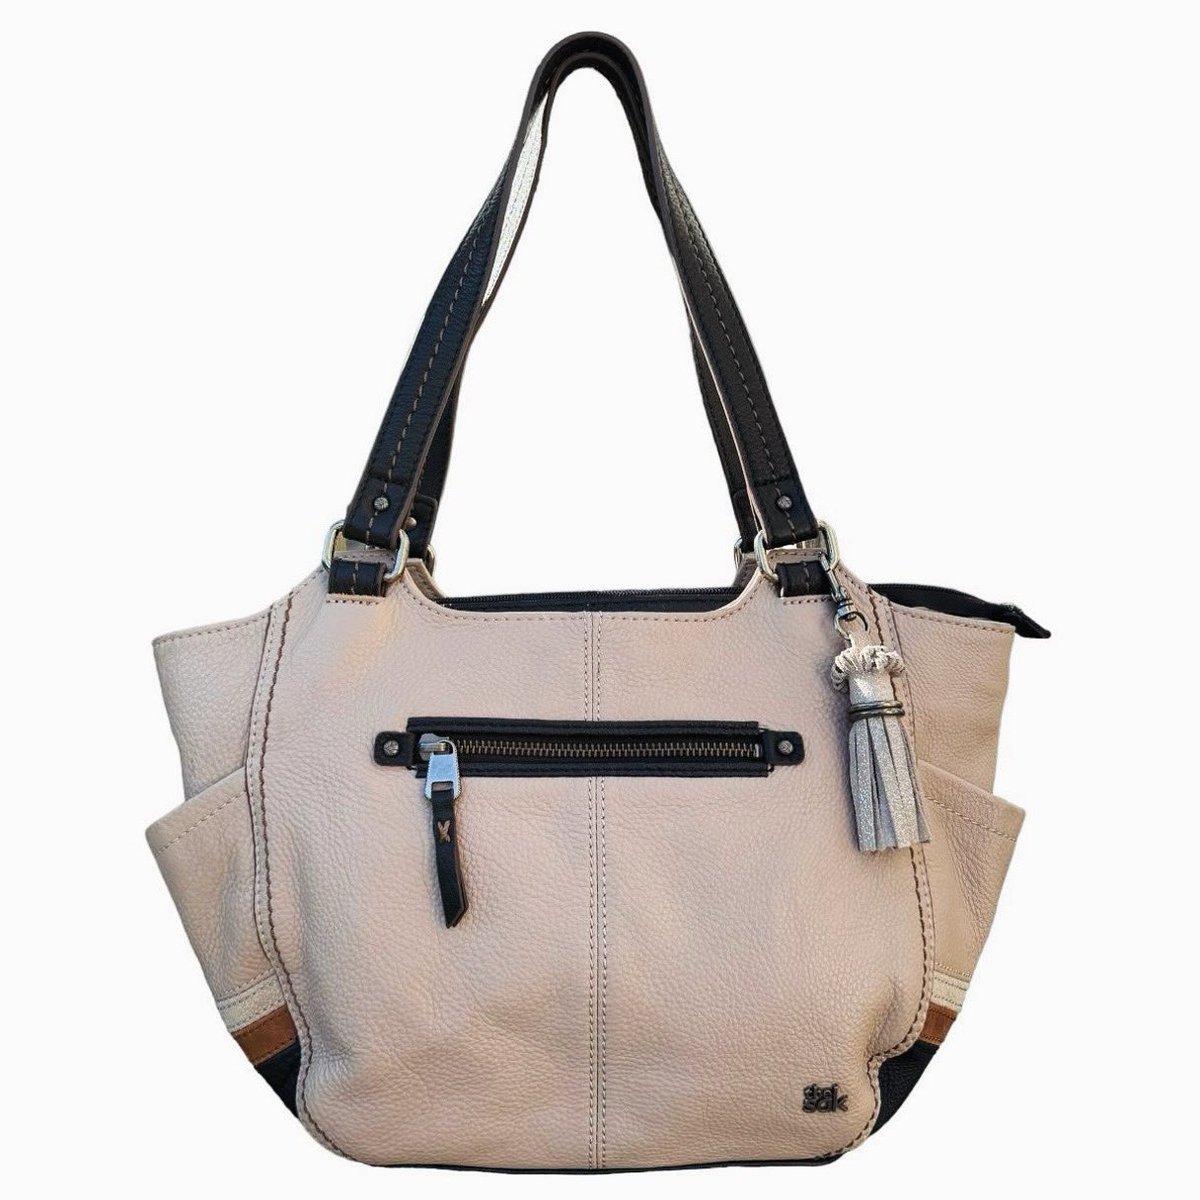 The Sak Kendra Hobo Tote Tan Brown and Black Shoulder Bag with a Fob. Just Listed in Depop and Poshmark Stores. 

Follow Depop and Poshmark Stores in Bio: #vintagebags #thesak #leatherbag #leather #bag #handmade #fashion #leathergoods #leathercraft #bags #handbag #leatherbags